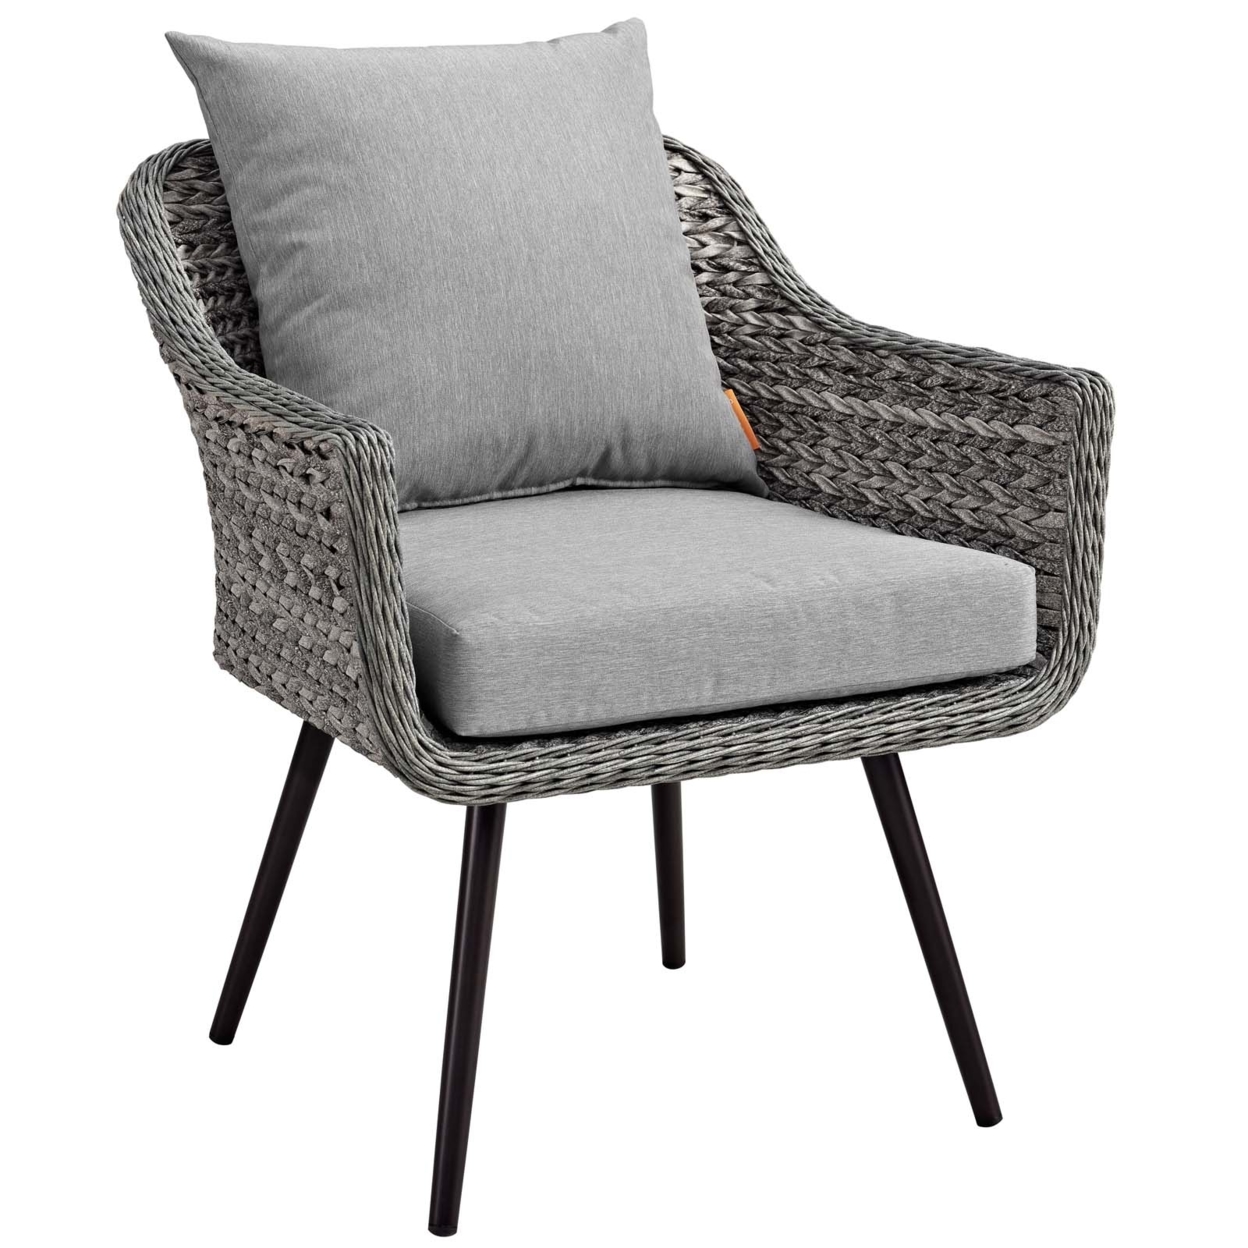 Endeavor Outdoor Patio Wicker Rattan Armchair (3023-GRY-GRY)